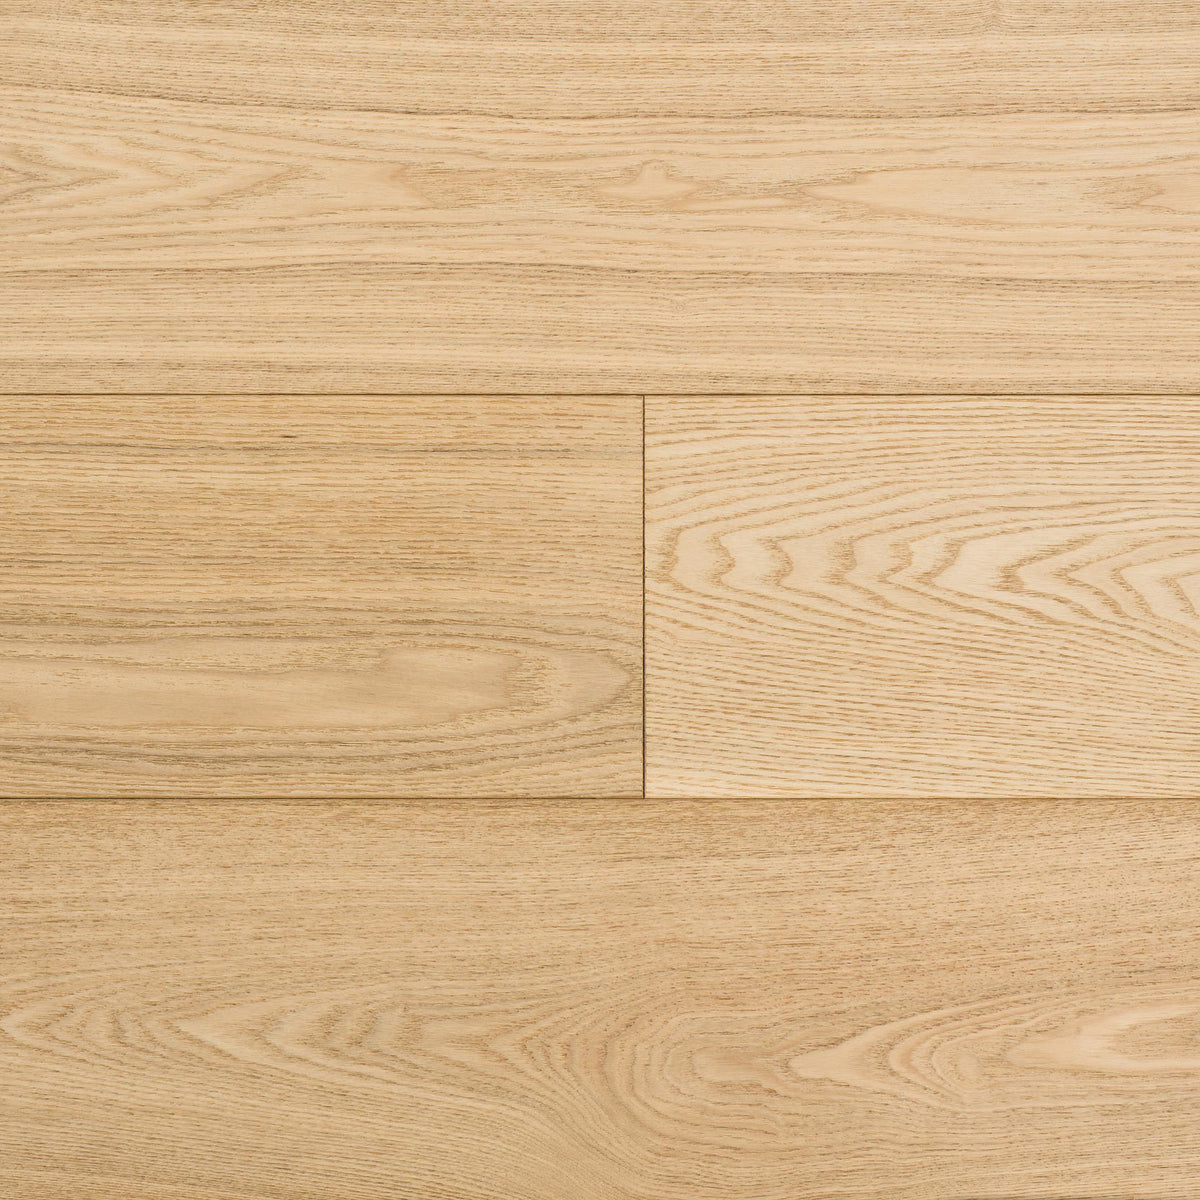 Naturally Aged Flooring - Summit Series 7.5 in. - Ozarks